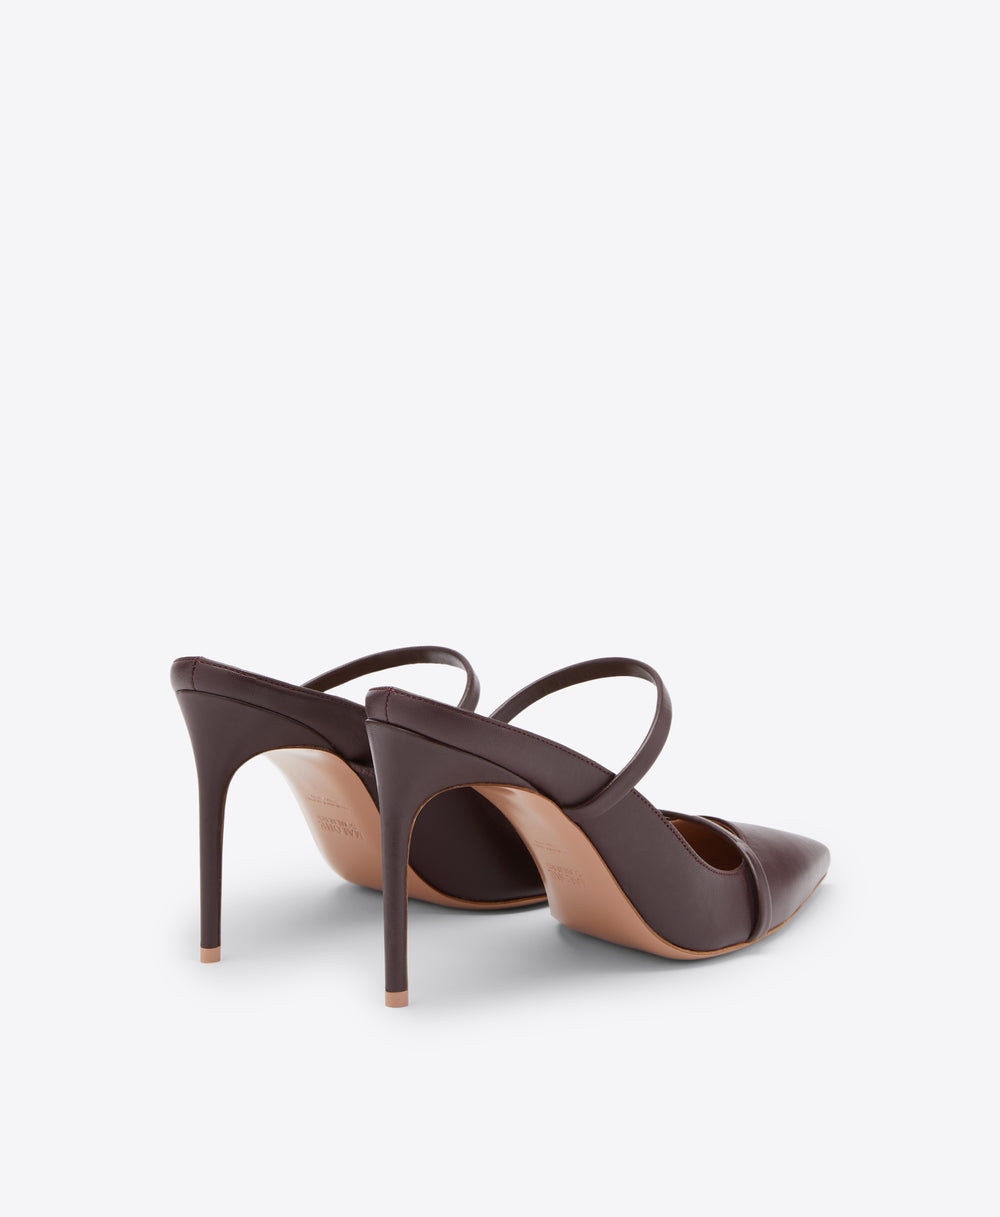 Aurora 90 Cabernet Leather Heeled Mule Malone Souliers